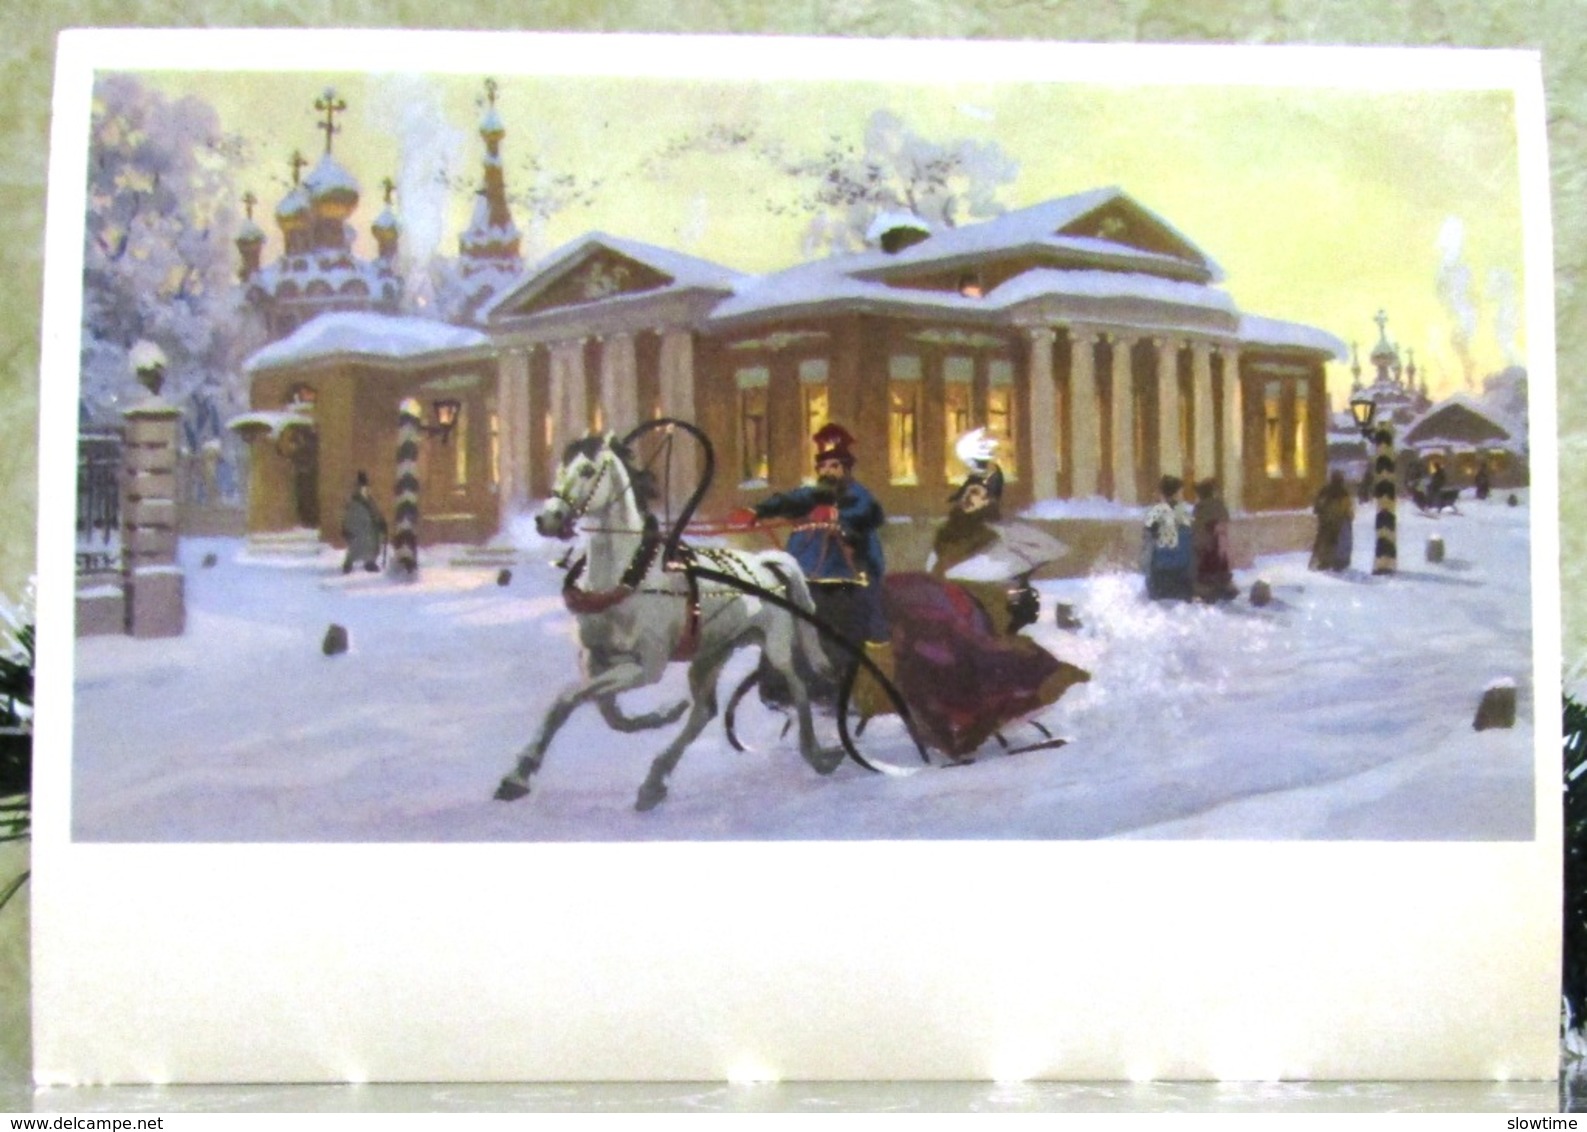 War And Peace Leo Tolstoy. Nicholas, Scene From The Novel. Large Art USSR Russia Postcard - Russia